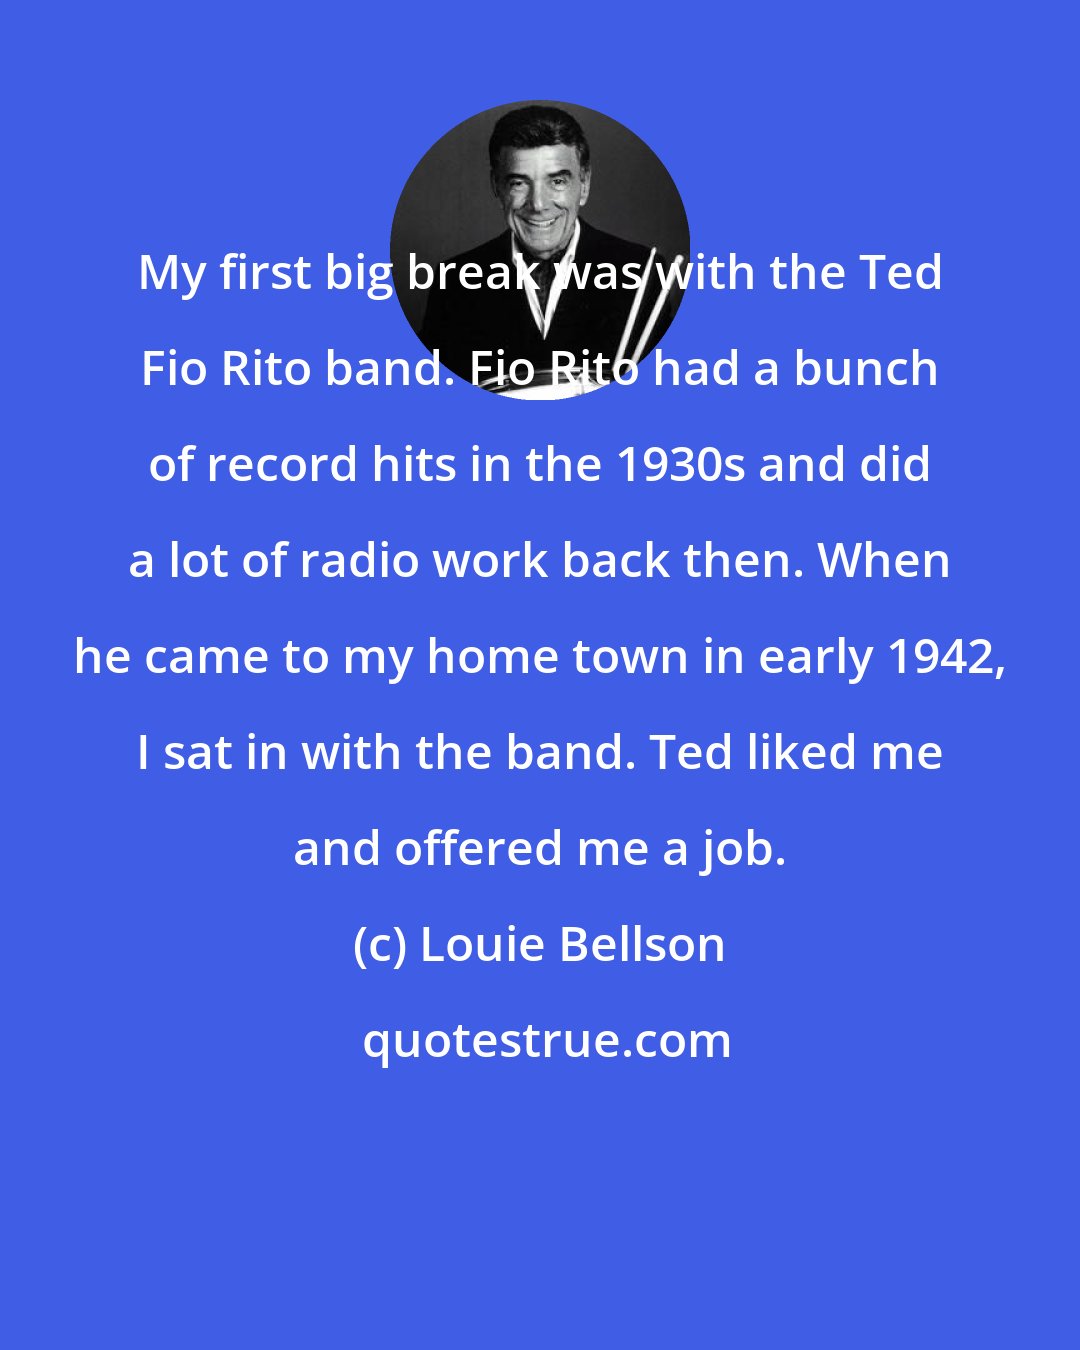 Louie Bellson: My first big break was with the Ted Fio Rito band. Fio Rito had a bunch of record hits in the 1930s and did a lot of radio work back then. When he came to my home town in early 1942, I sat in with the band. Ted liked me and offered me a job.